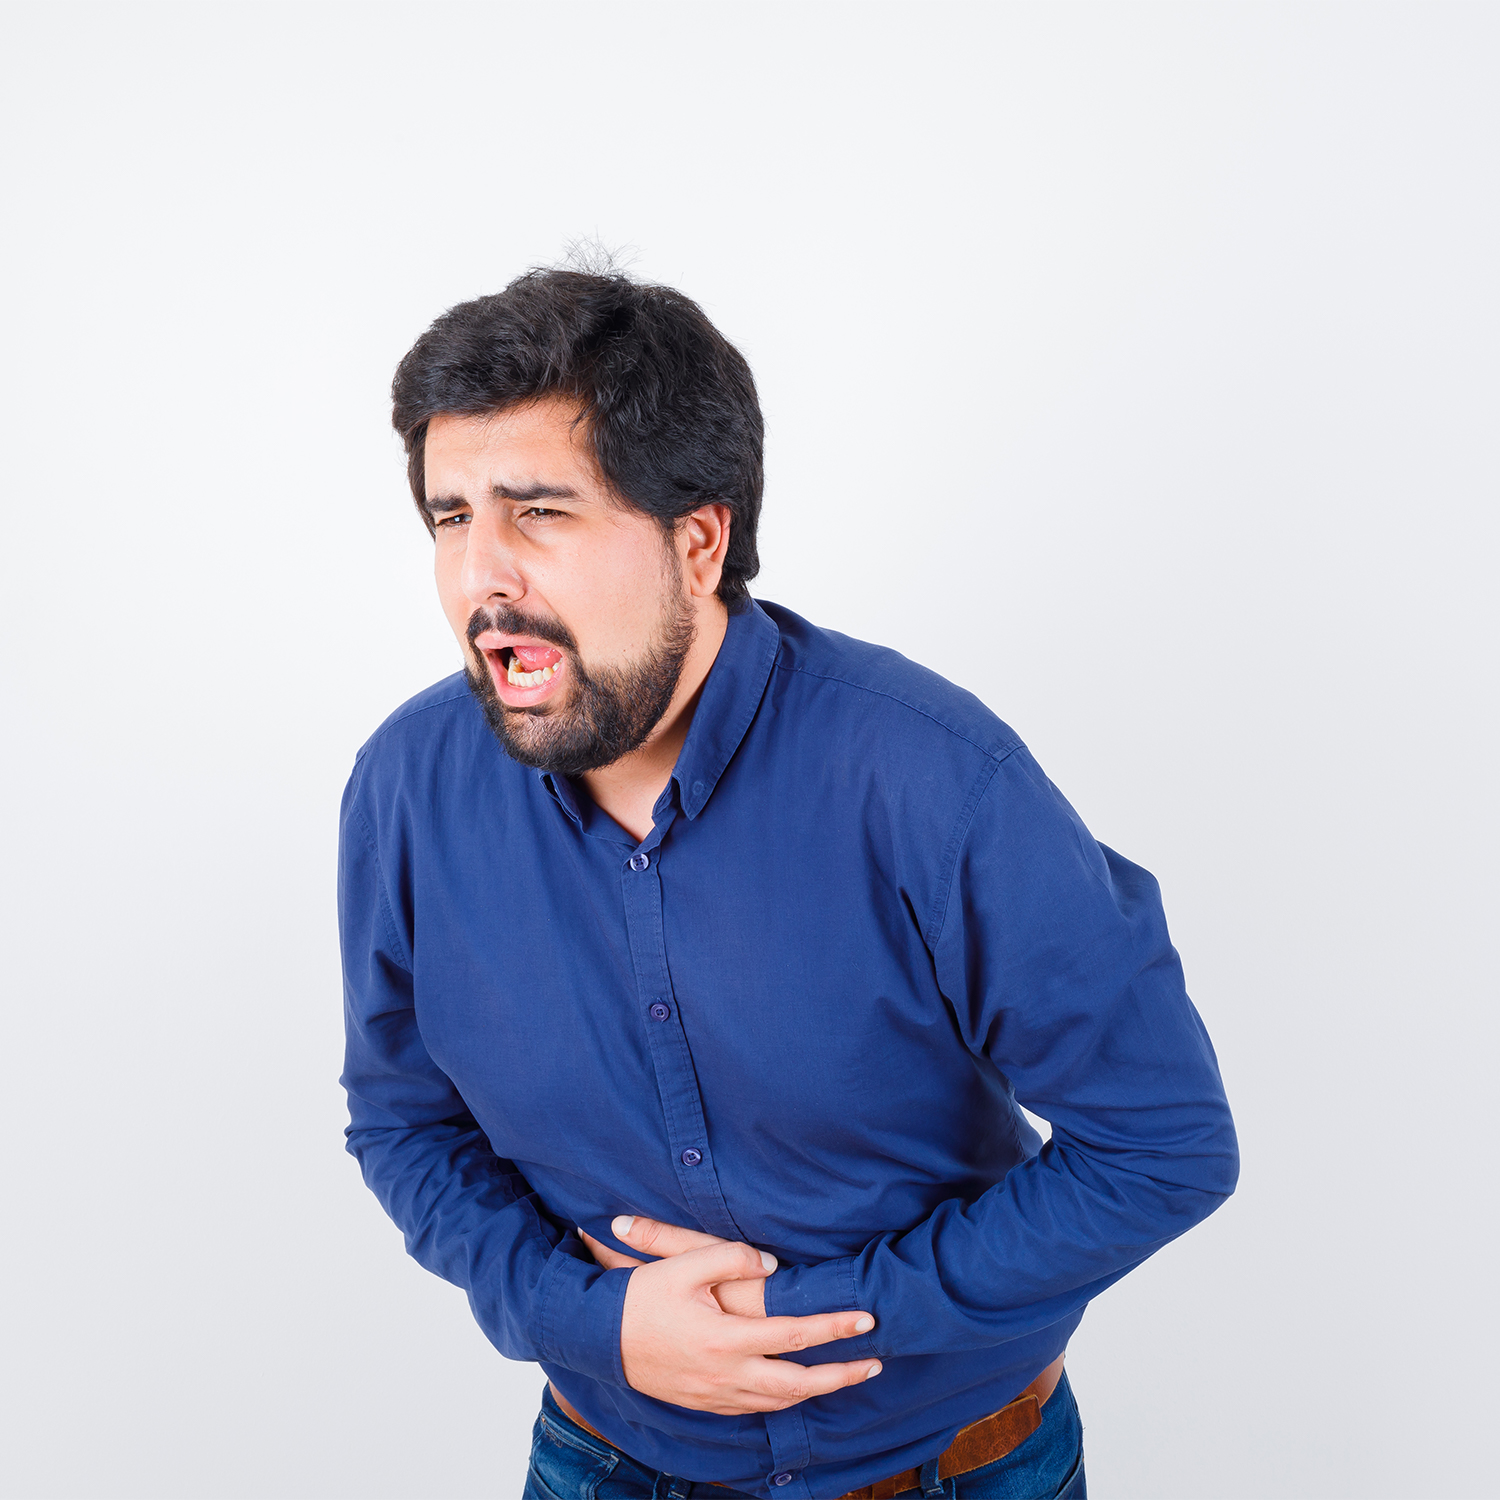 Natural Remedies to Overcome Gallbladder Pain